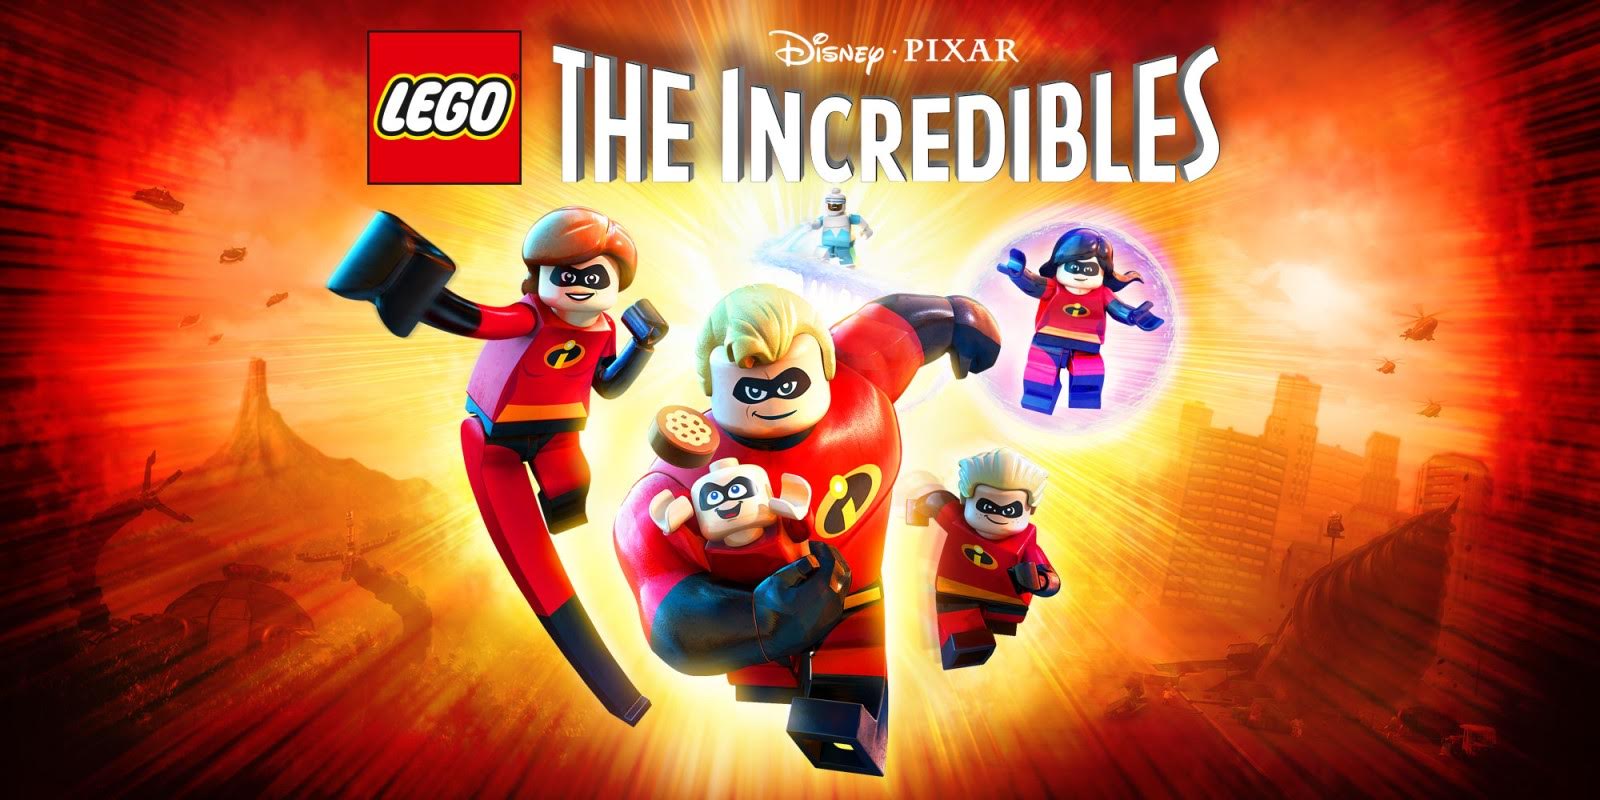 #5: LEGO THE INCREDIBLES